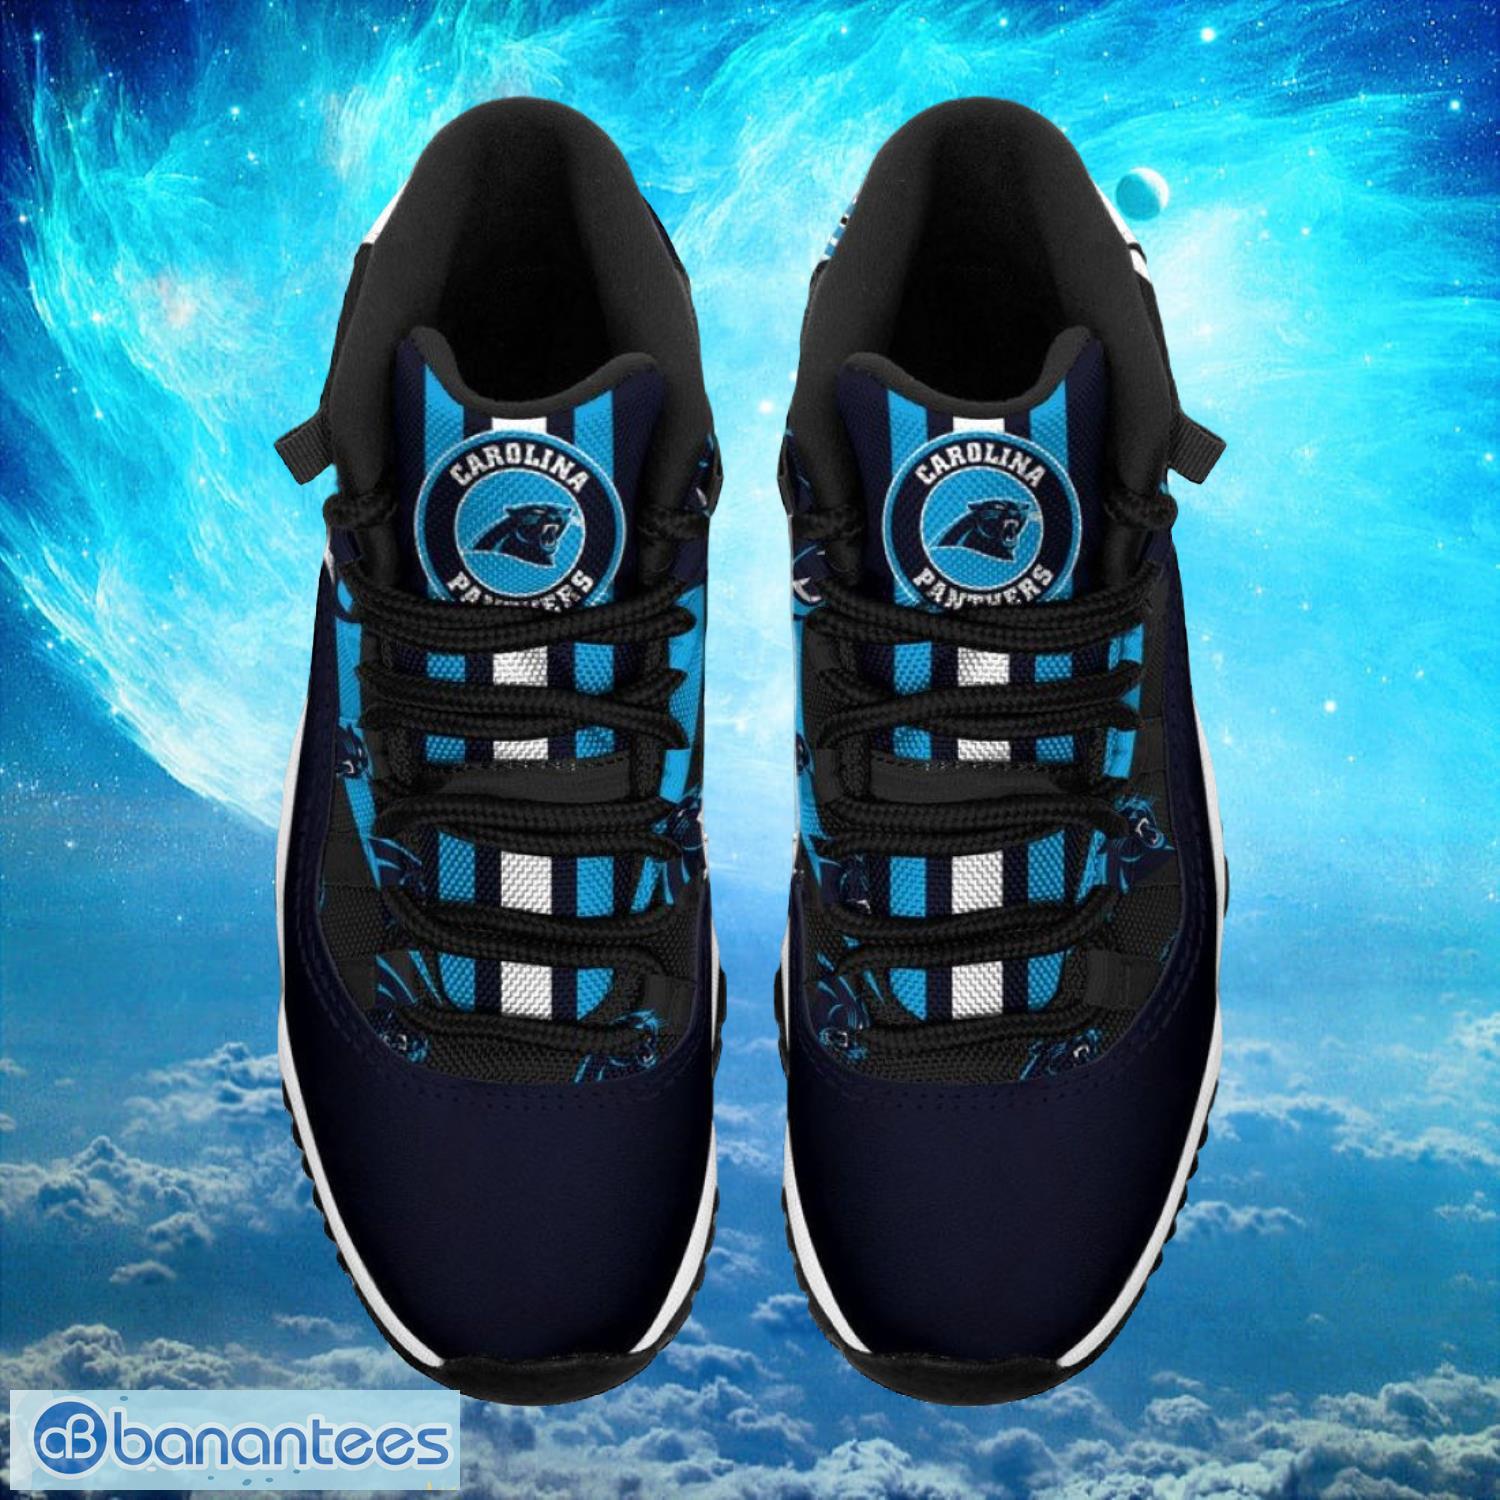 Carolina Panthers NFL Air Jordan 11 Sneakers Shoes Gift For Fans Product Photo 2